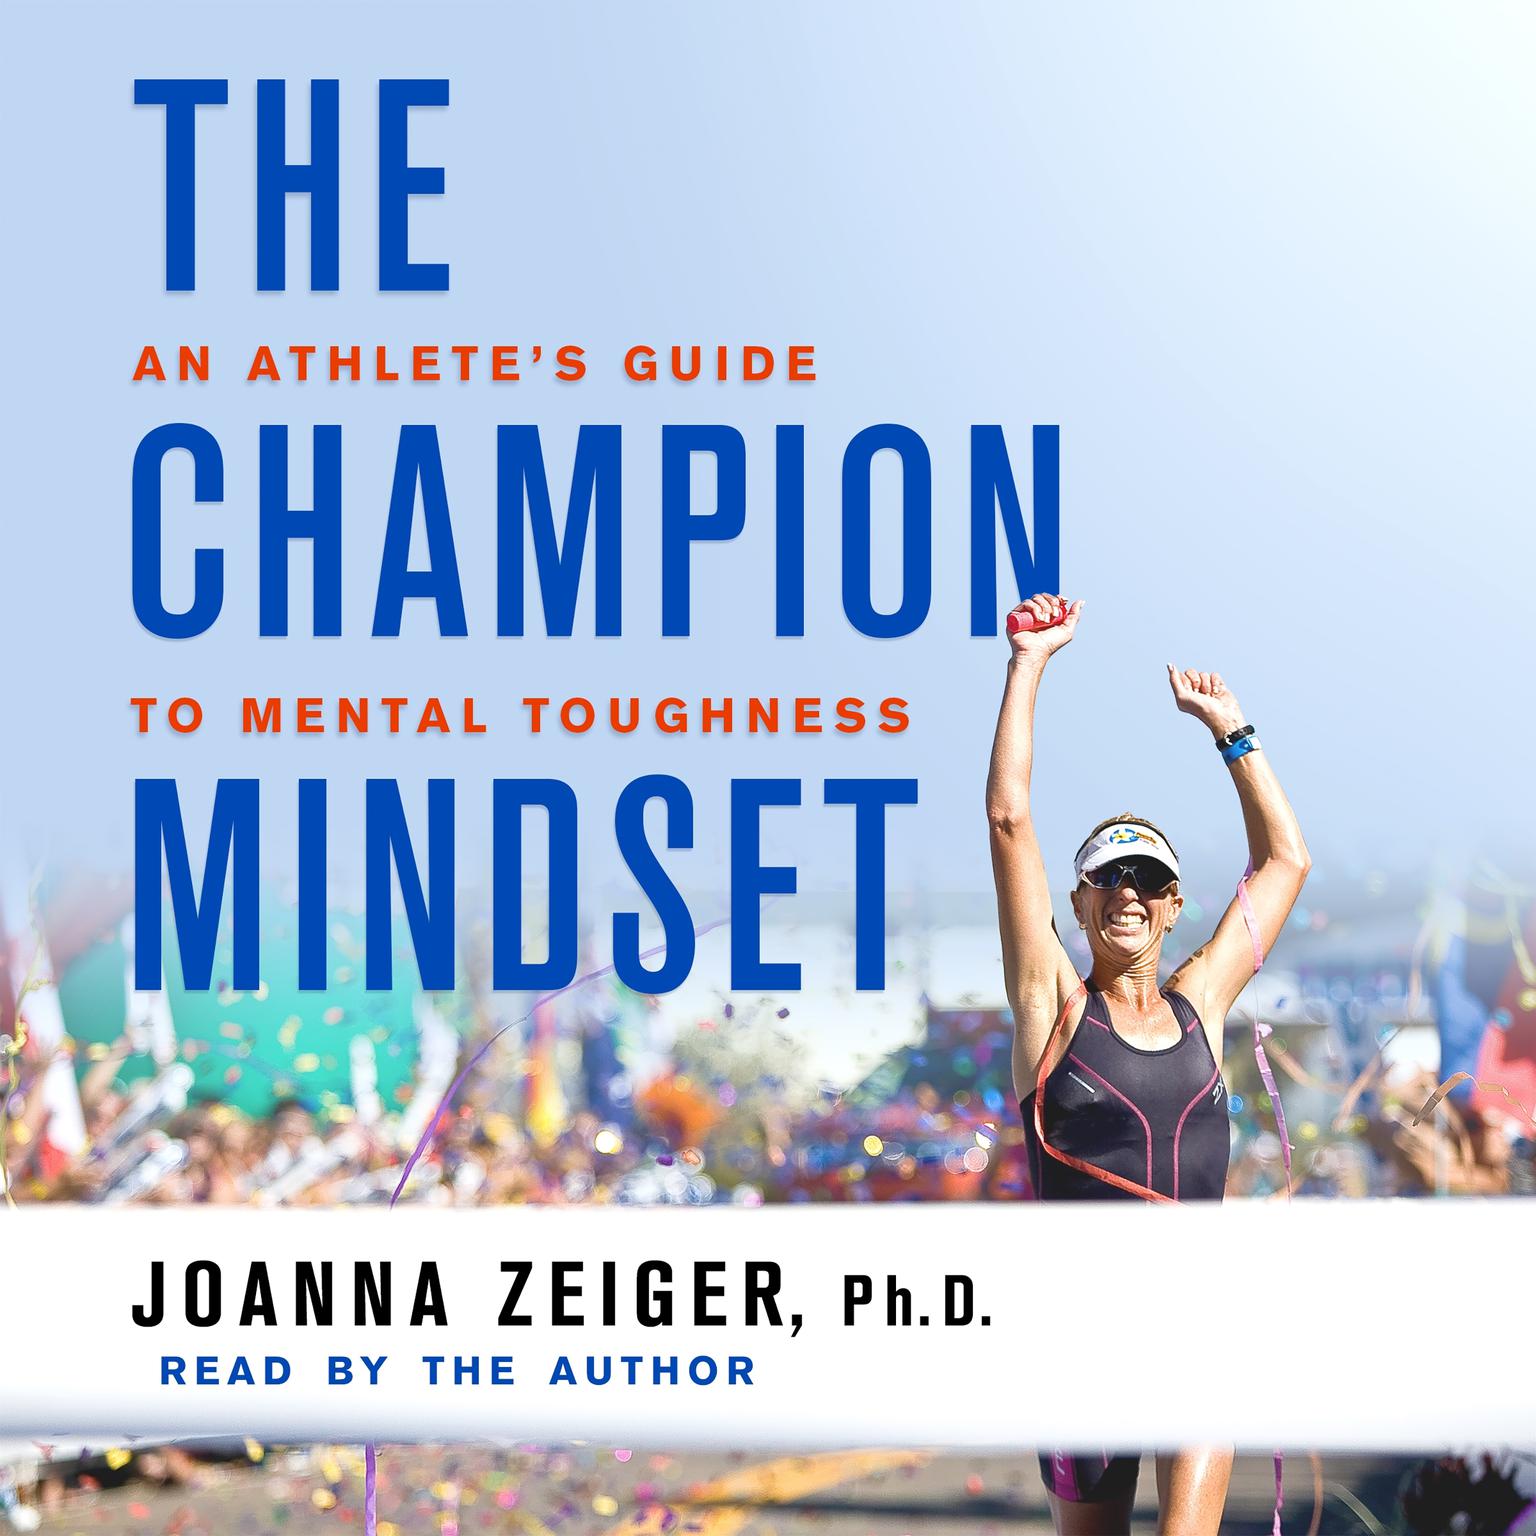 The Champion Mindset: An Athletes Guide to Mental Toughness Audiobook, by Joanna Zeiger